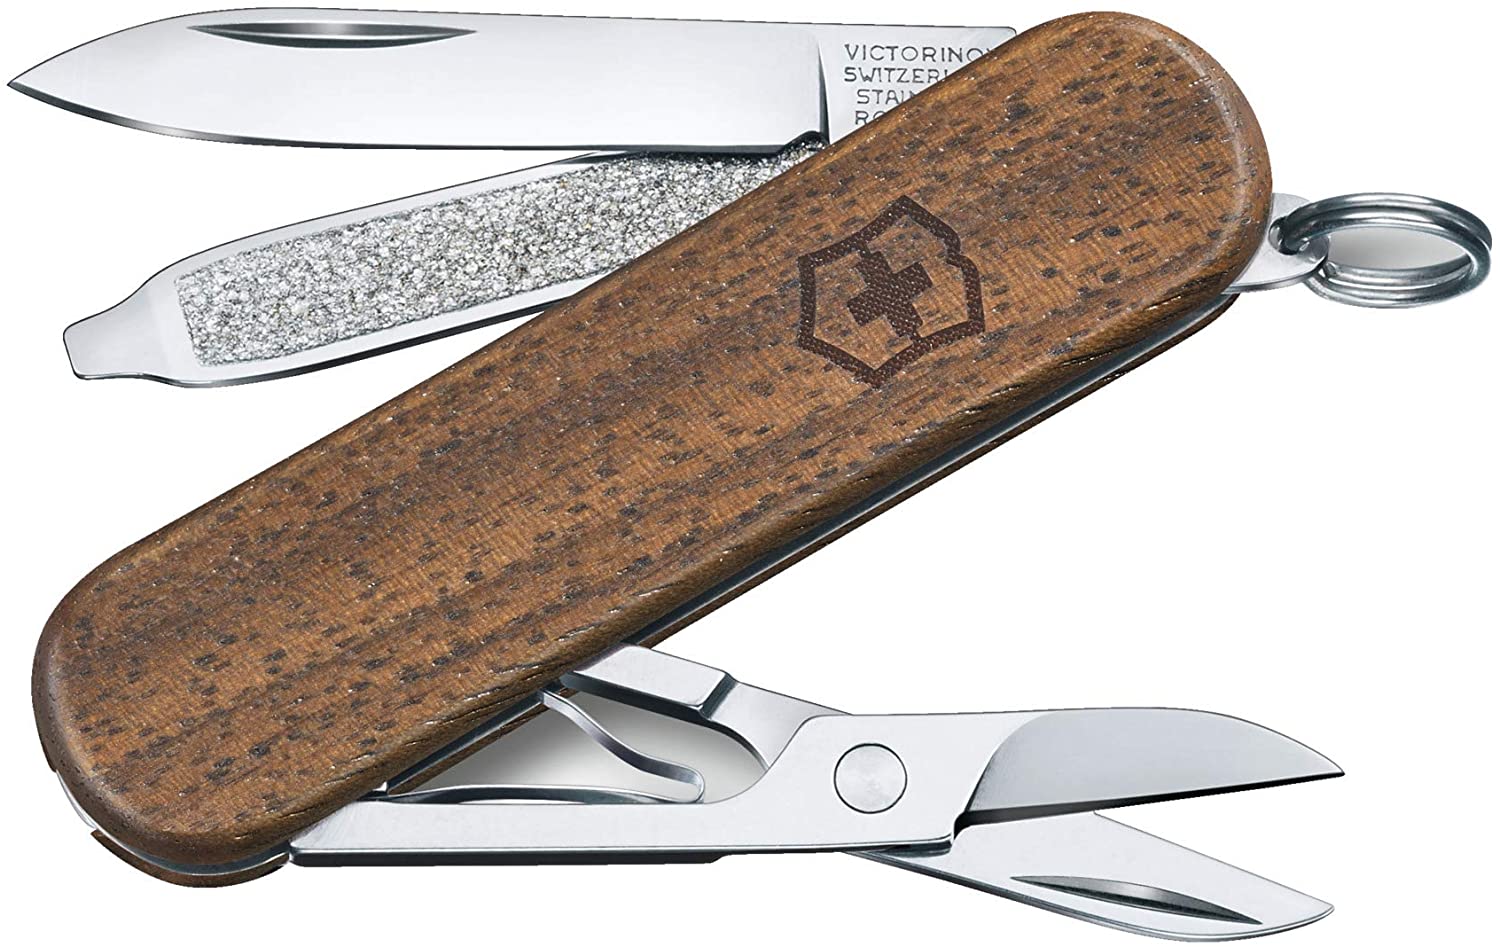 Victorinox Classic SD Wood Pocket Knife (5 Functions Blade Scissors Nail File) Wood in Blister Packaging